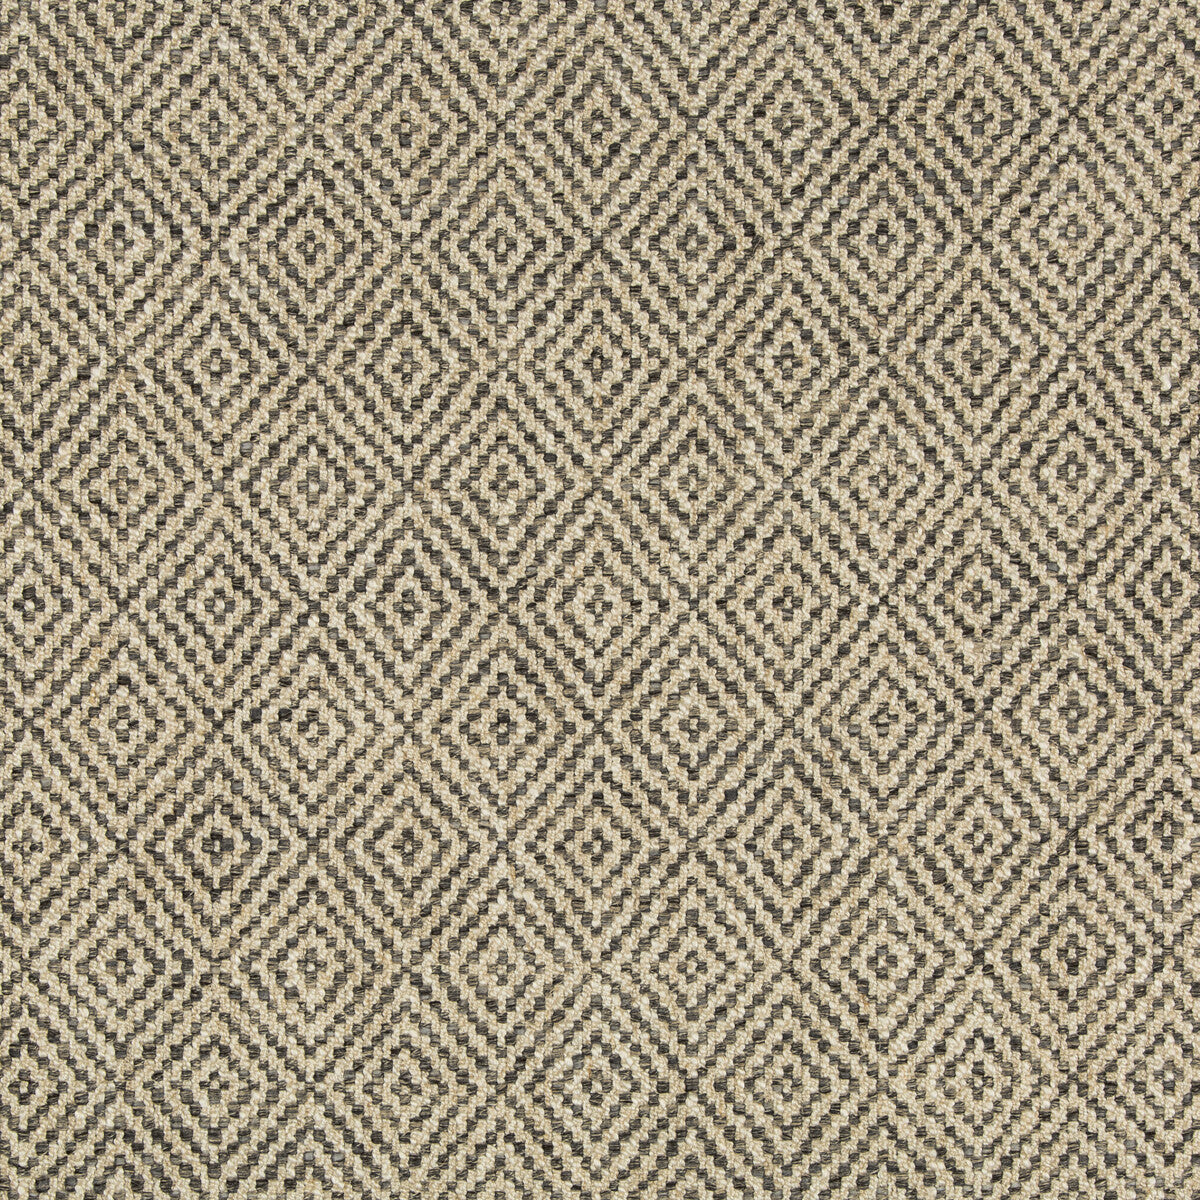 Izu fabric in slate color - pattern 35446.1611.0 - by Kravet Couture in the Izu Collection collection